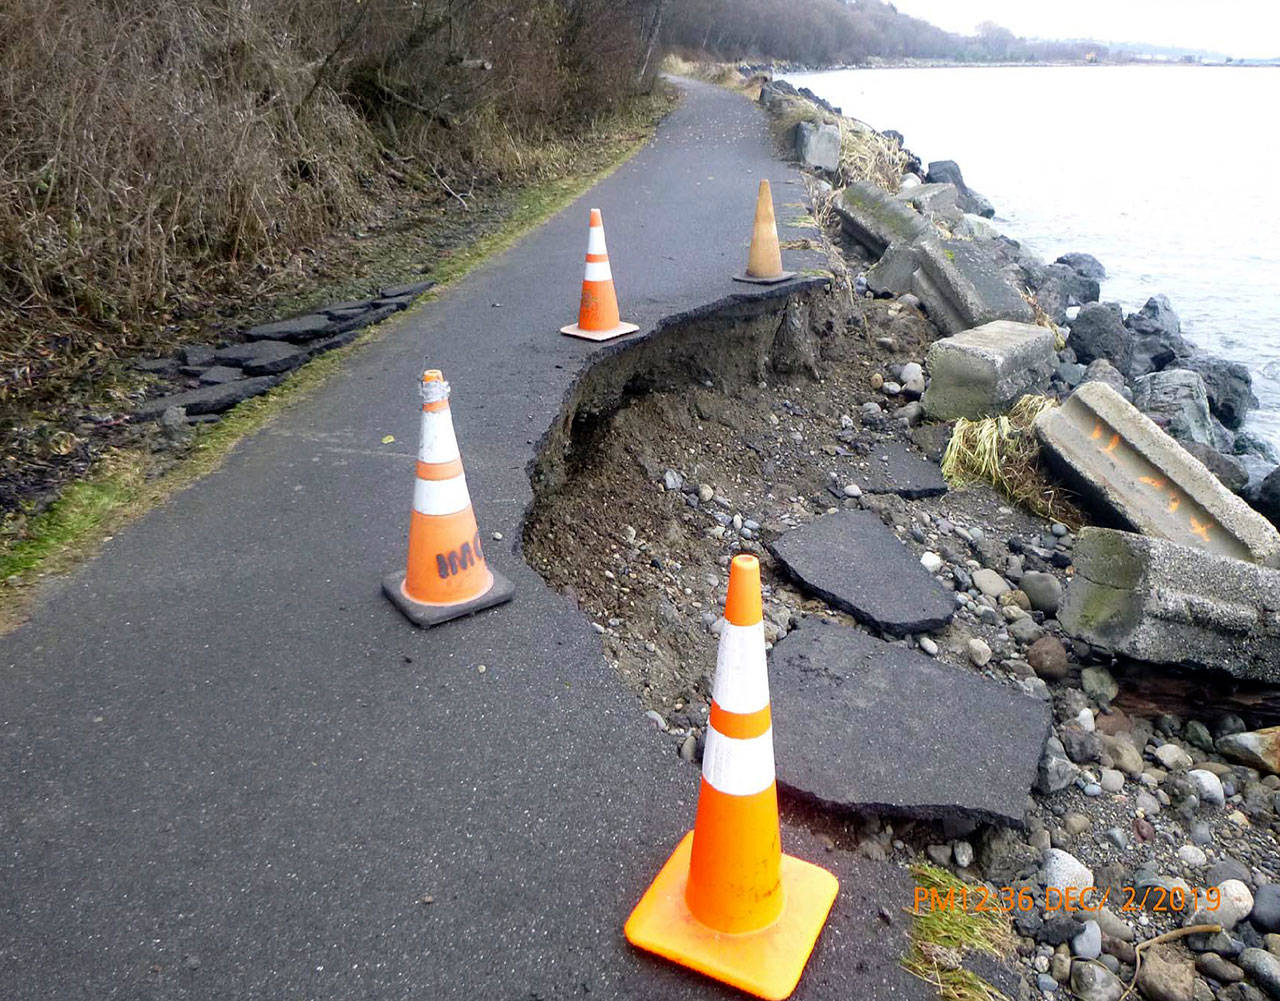 A section of the Olympic Discovery Trail blocked off after recent storm damage and mudslide make walkway impassable. (Port Angeles Parks and Recreation Department)